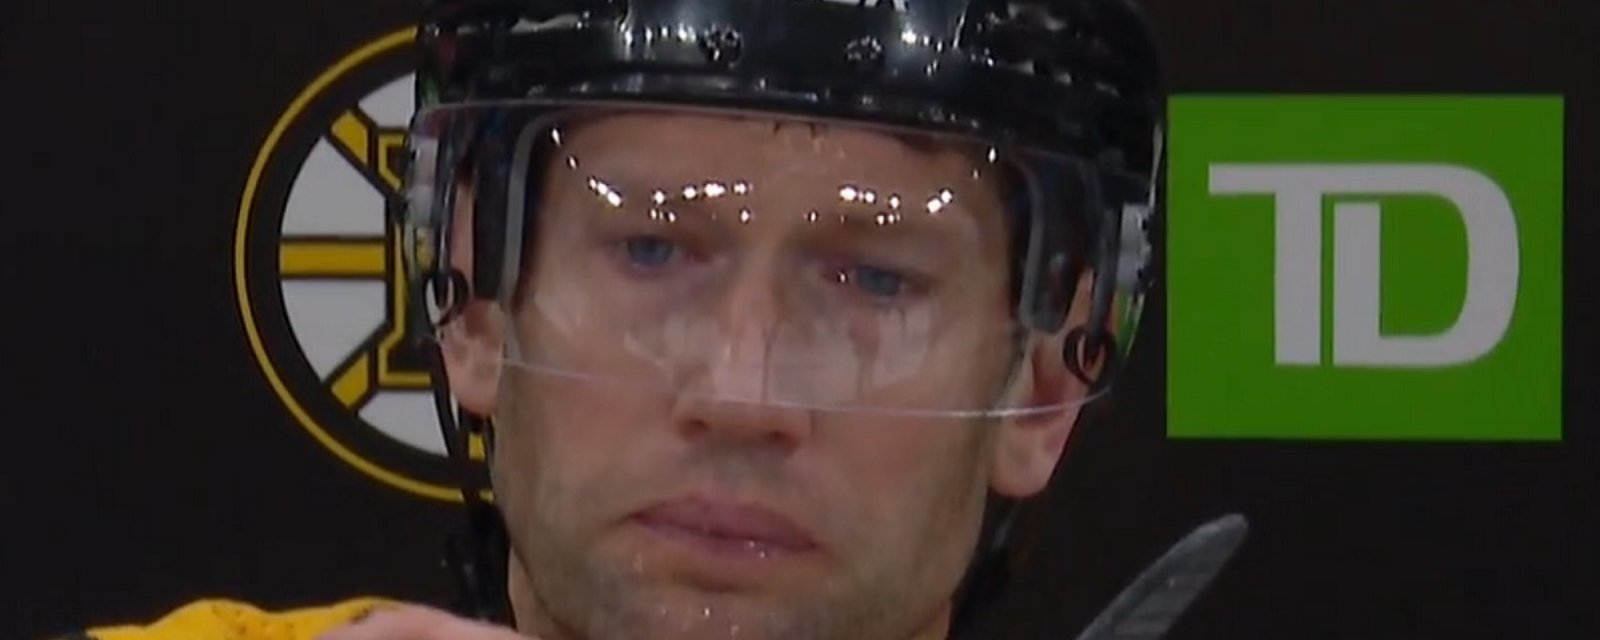 David Backes leaves the Bruins bench in tears after terrible injury to Scott Sabourin.